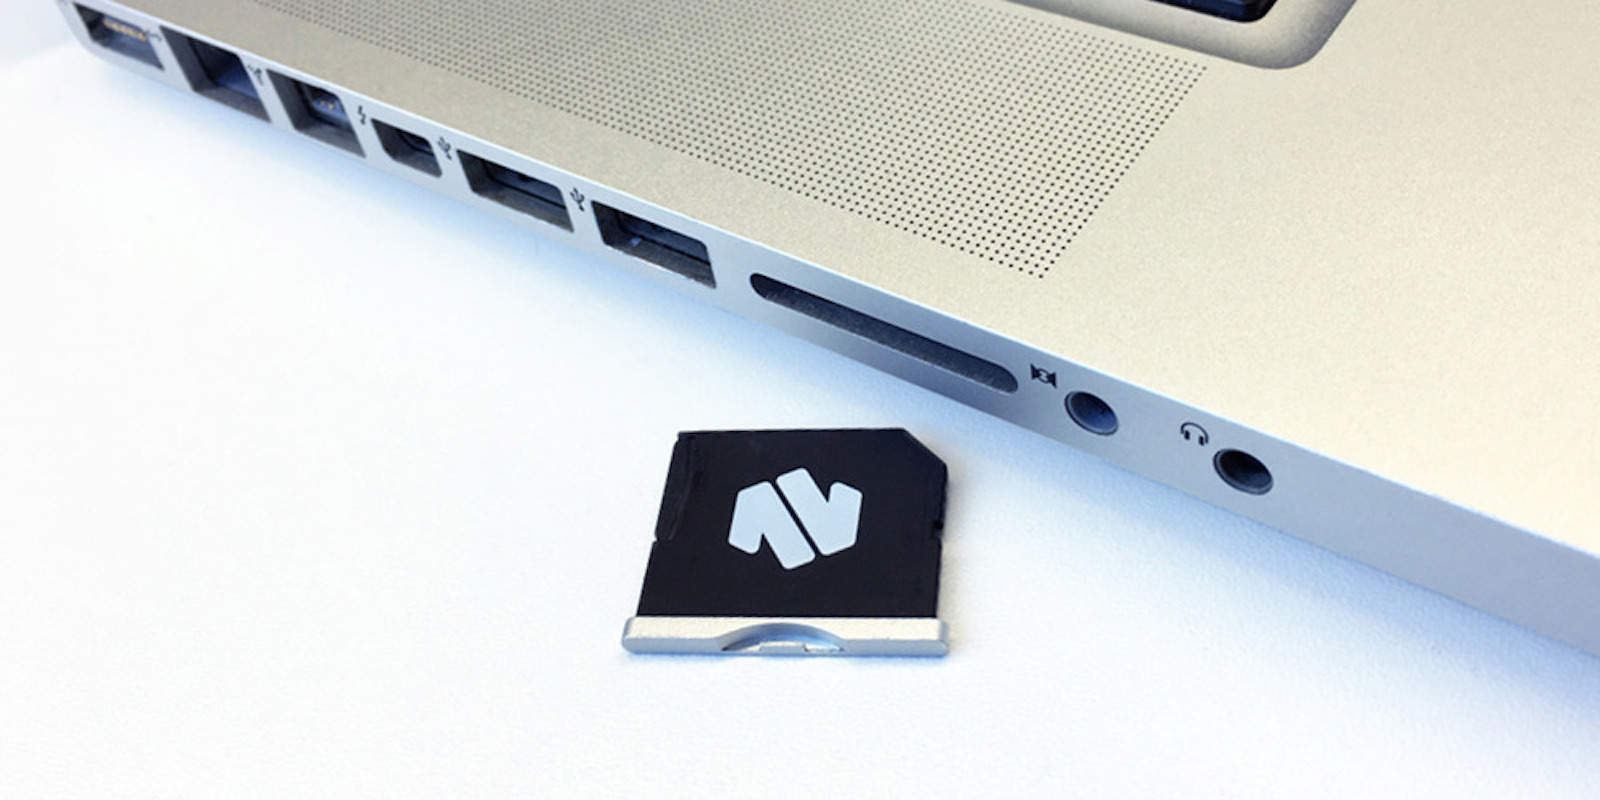 Instantly and seamlessly add up to 200GB of storage without a bulky external drive.